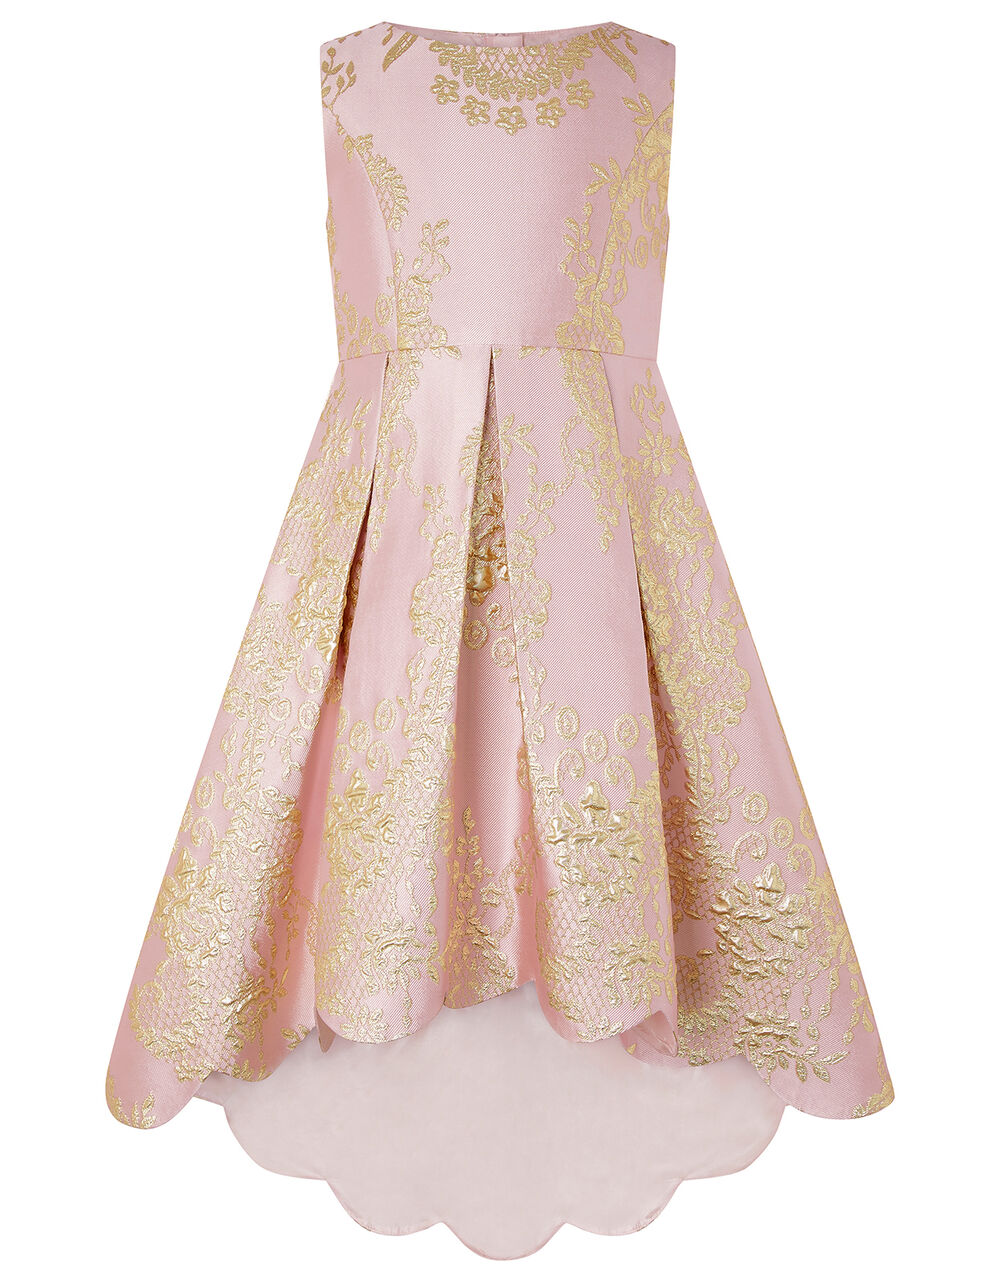 Rebecca Pink And White Jacquard High-Low Dress Pink | Girls' Dresses ...